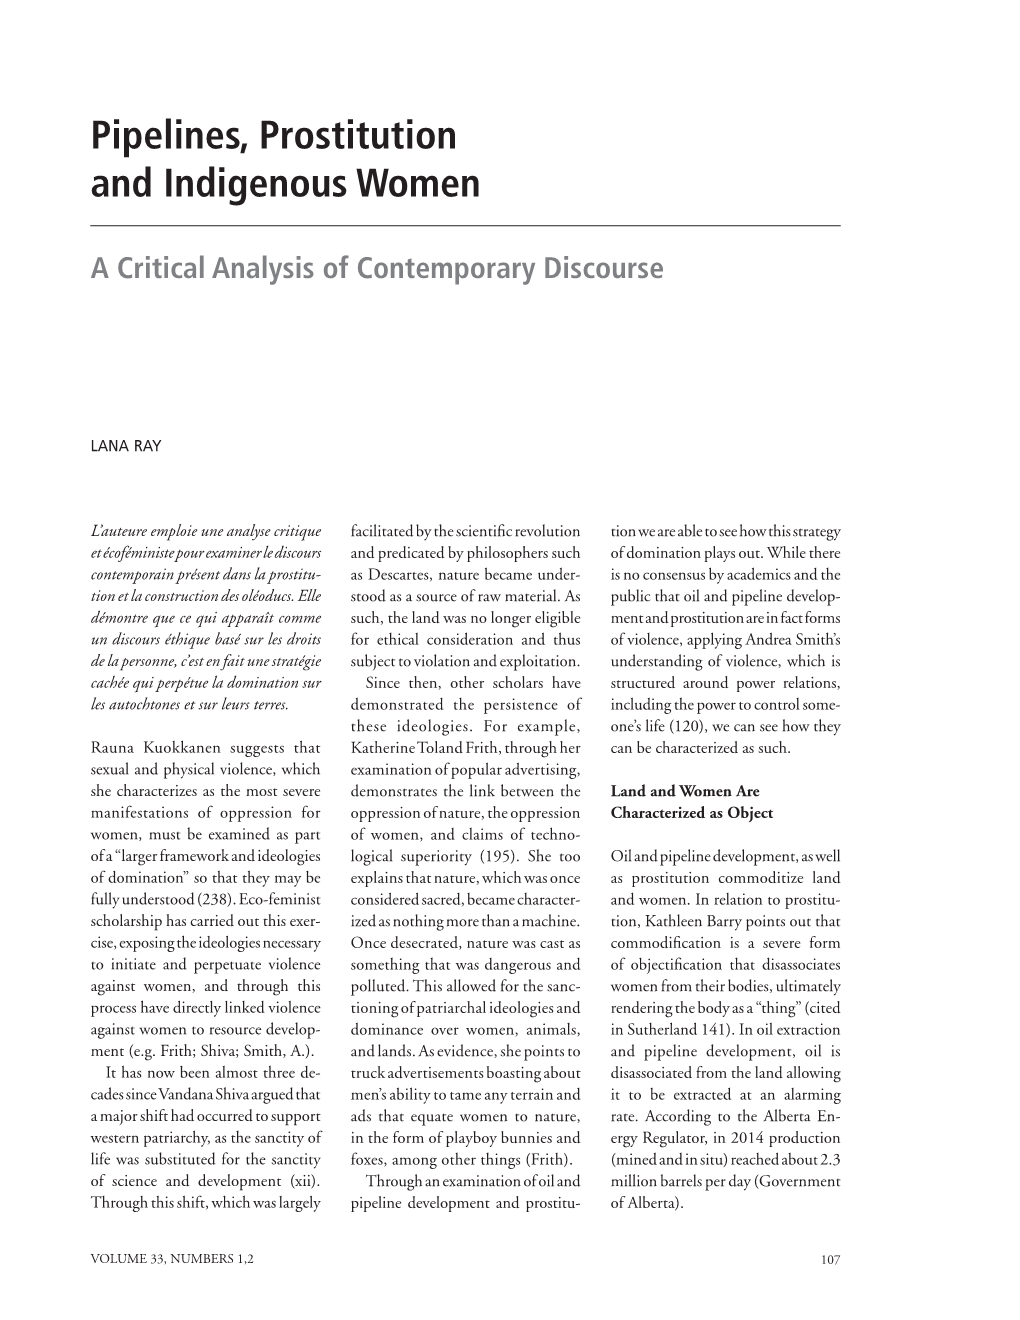 Pipelines, Prostitution and Indigenous Women